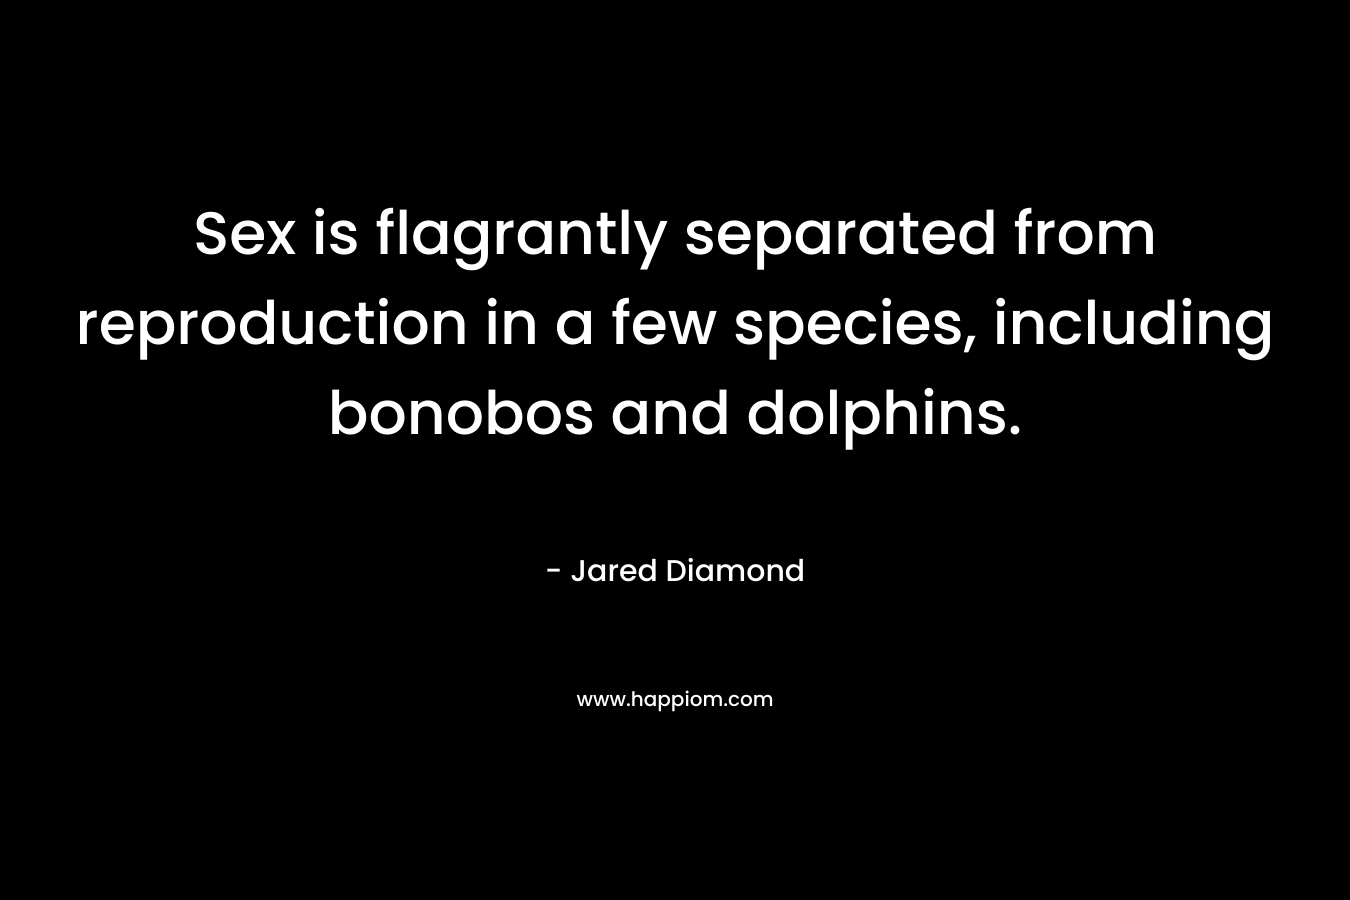 Sex is flagrantly separated from reproduction in a few species, including bonobos and dolphins. – Jared Diamond